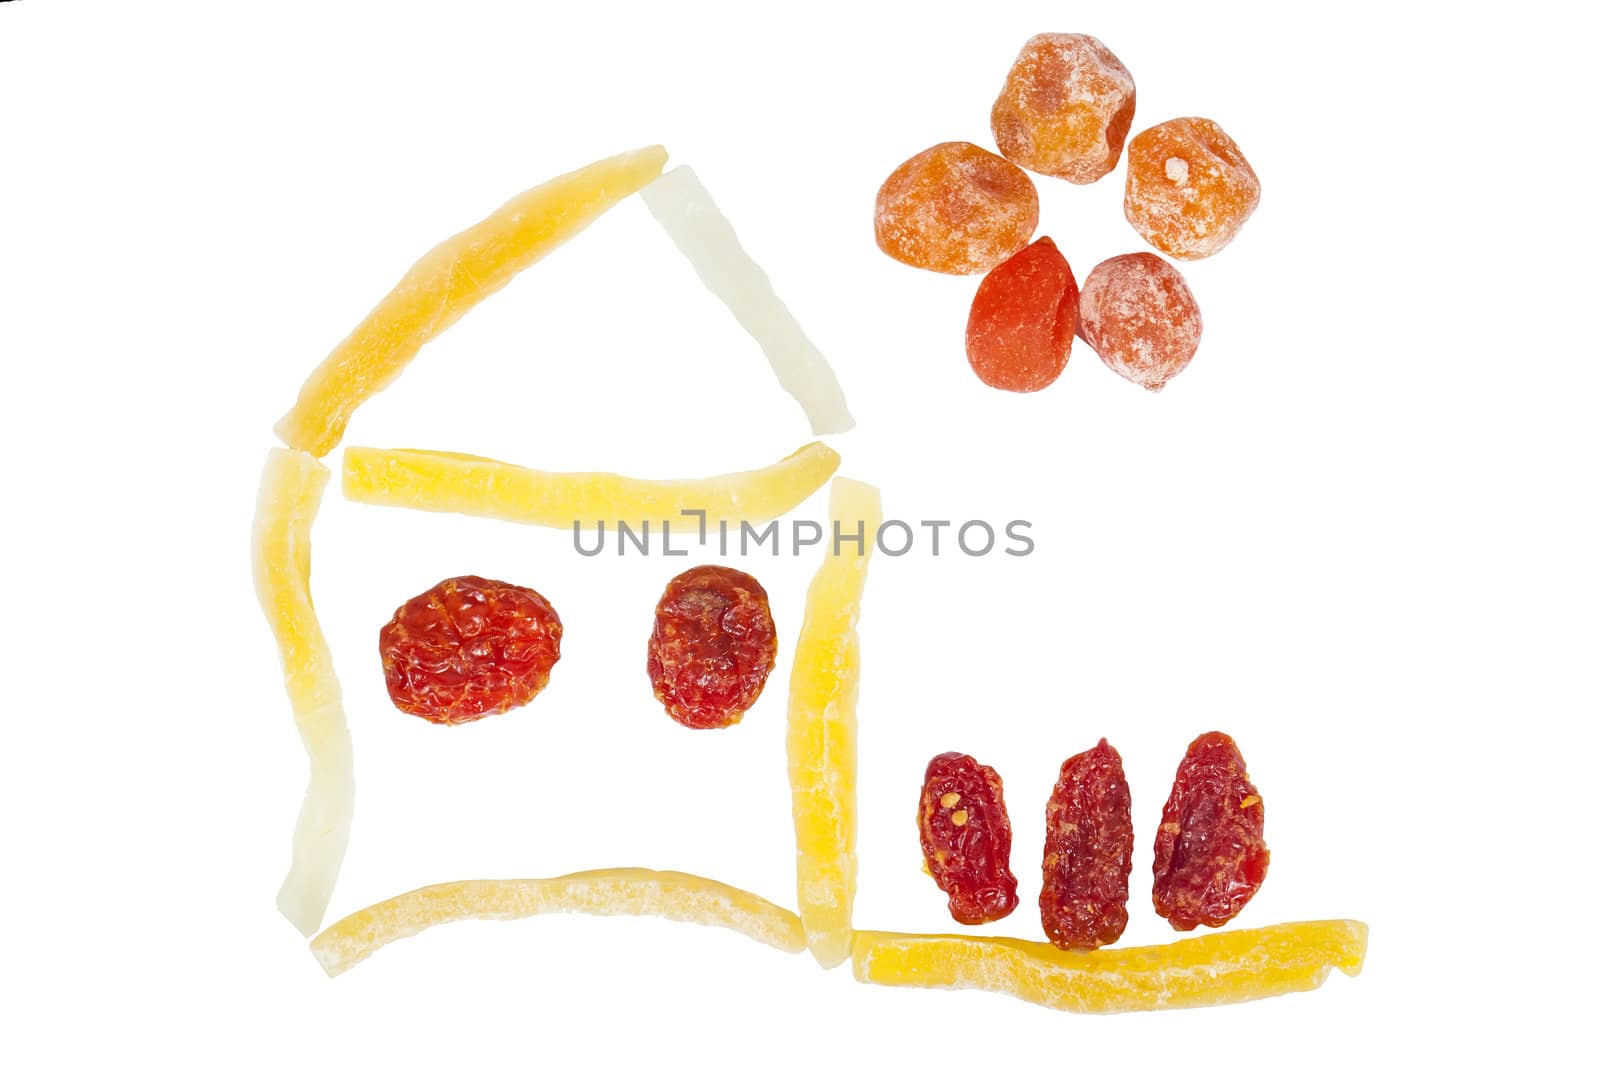 House figure made with dried fruits by RawGroup